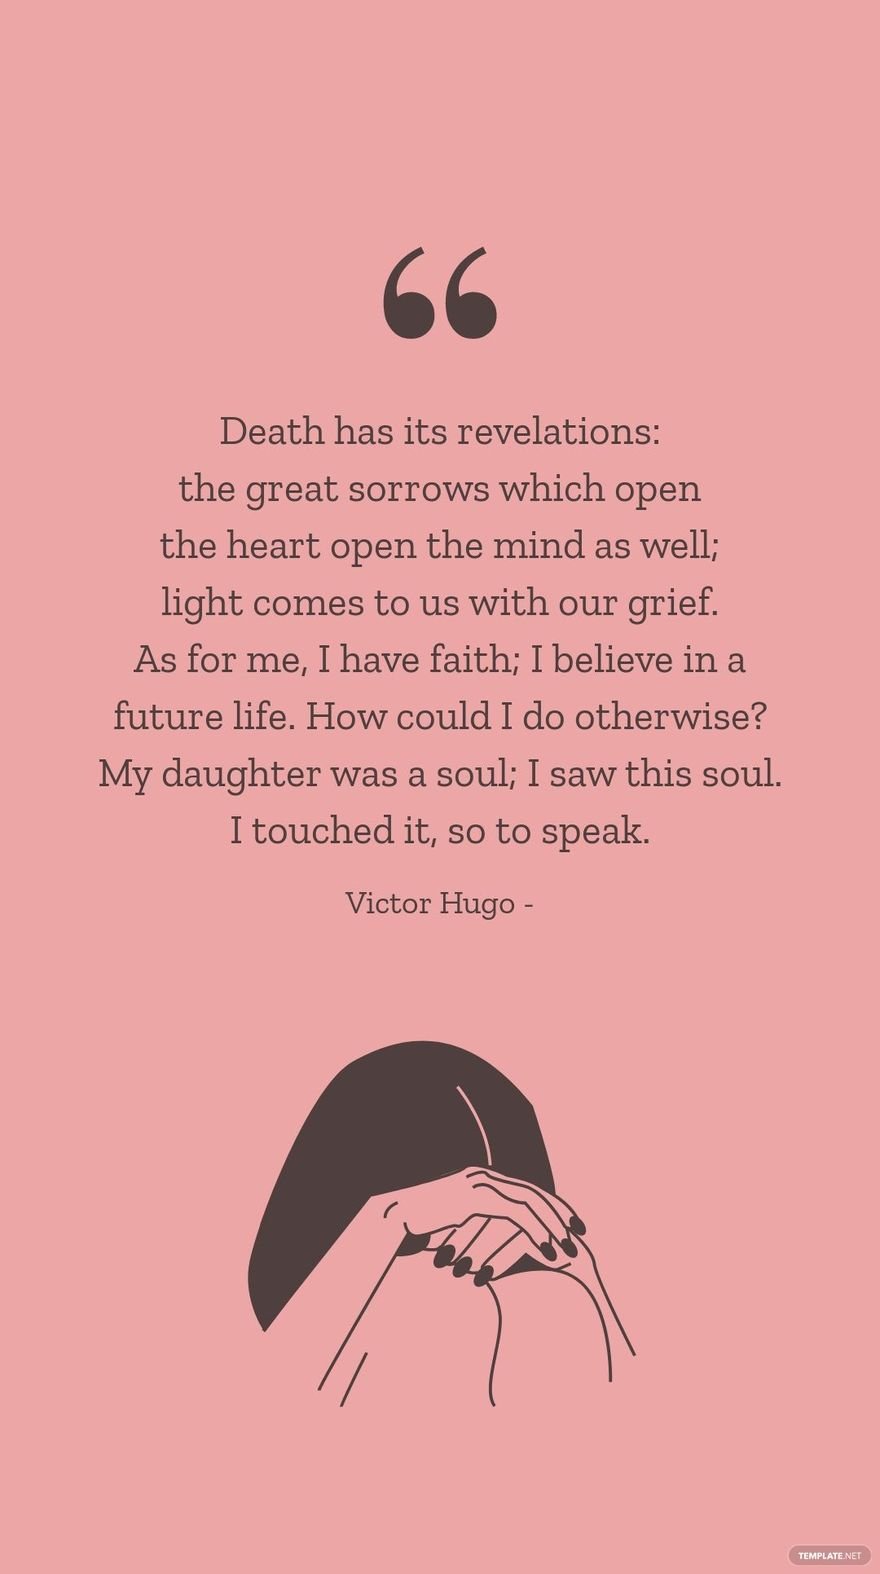 VICTOR HUGO - Death has its revelations: the great sorrows which open the heart open the mind as well; light comes to us with our grief. As for me, I have faith; I believe in a future life. How could 